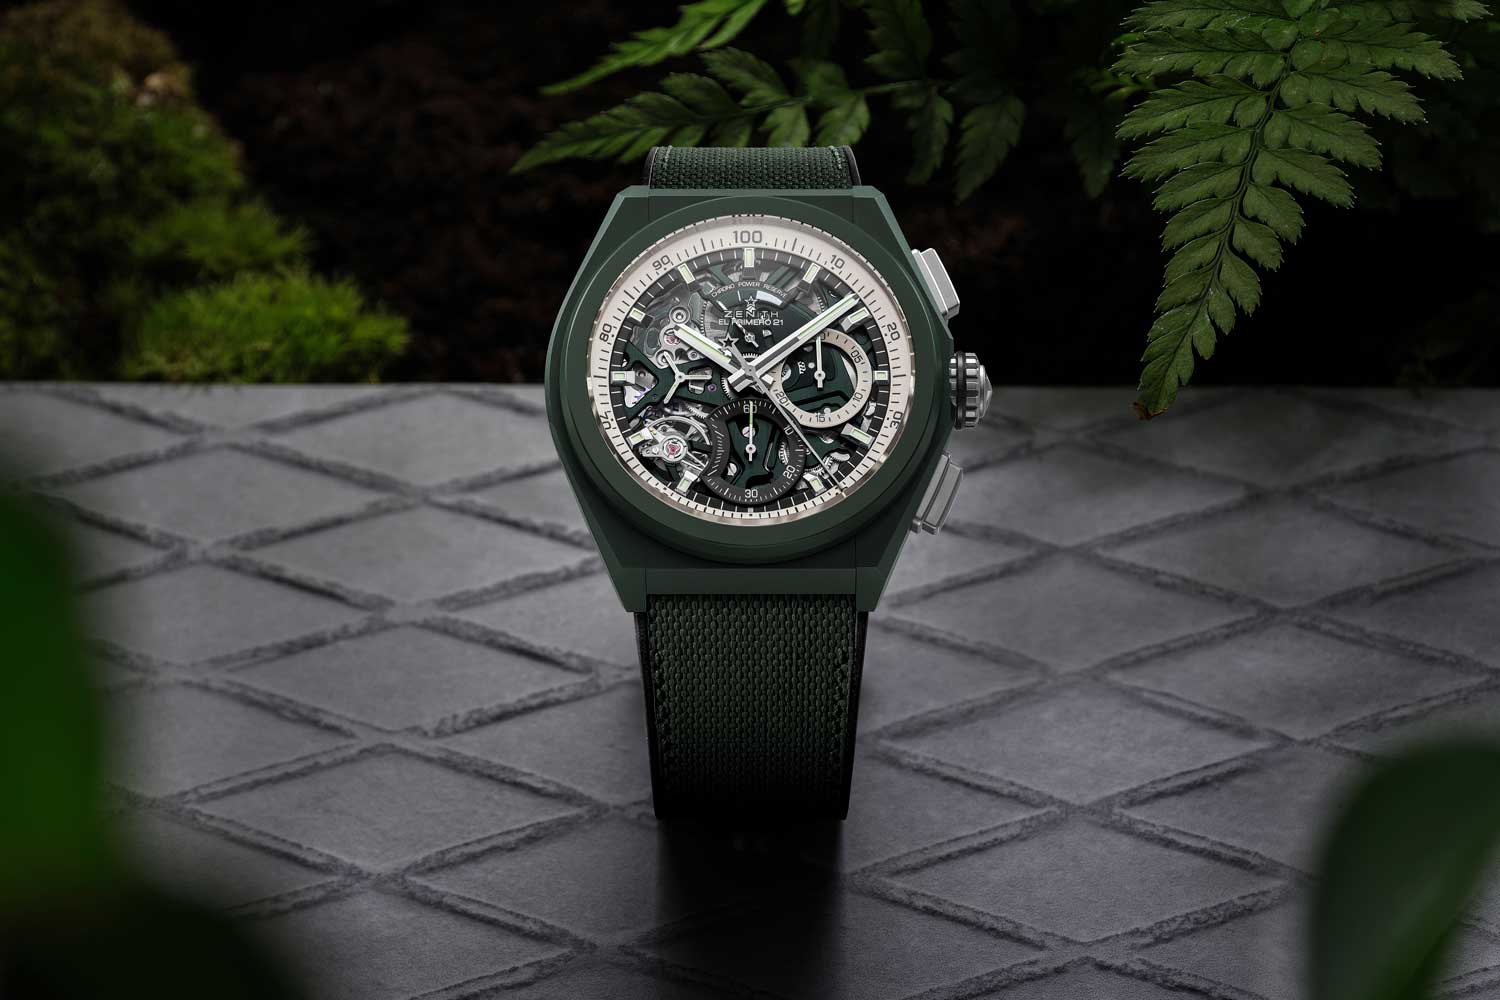 The Zenith DEFY 21 Urban Jungle with its 44mm khaki green ceramic case, powered by the self-winding El Primero 9004 automatic movement